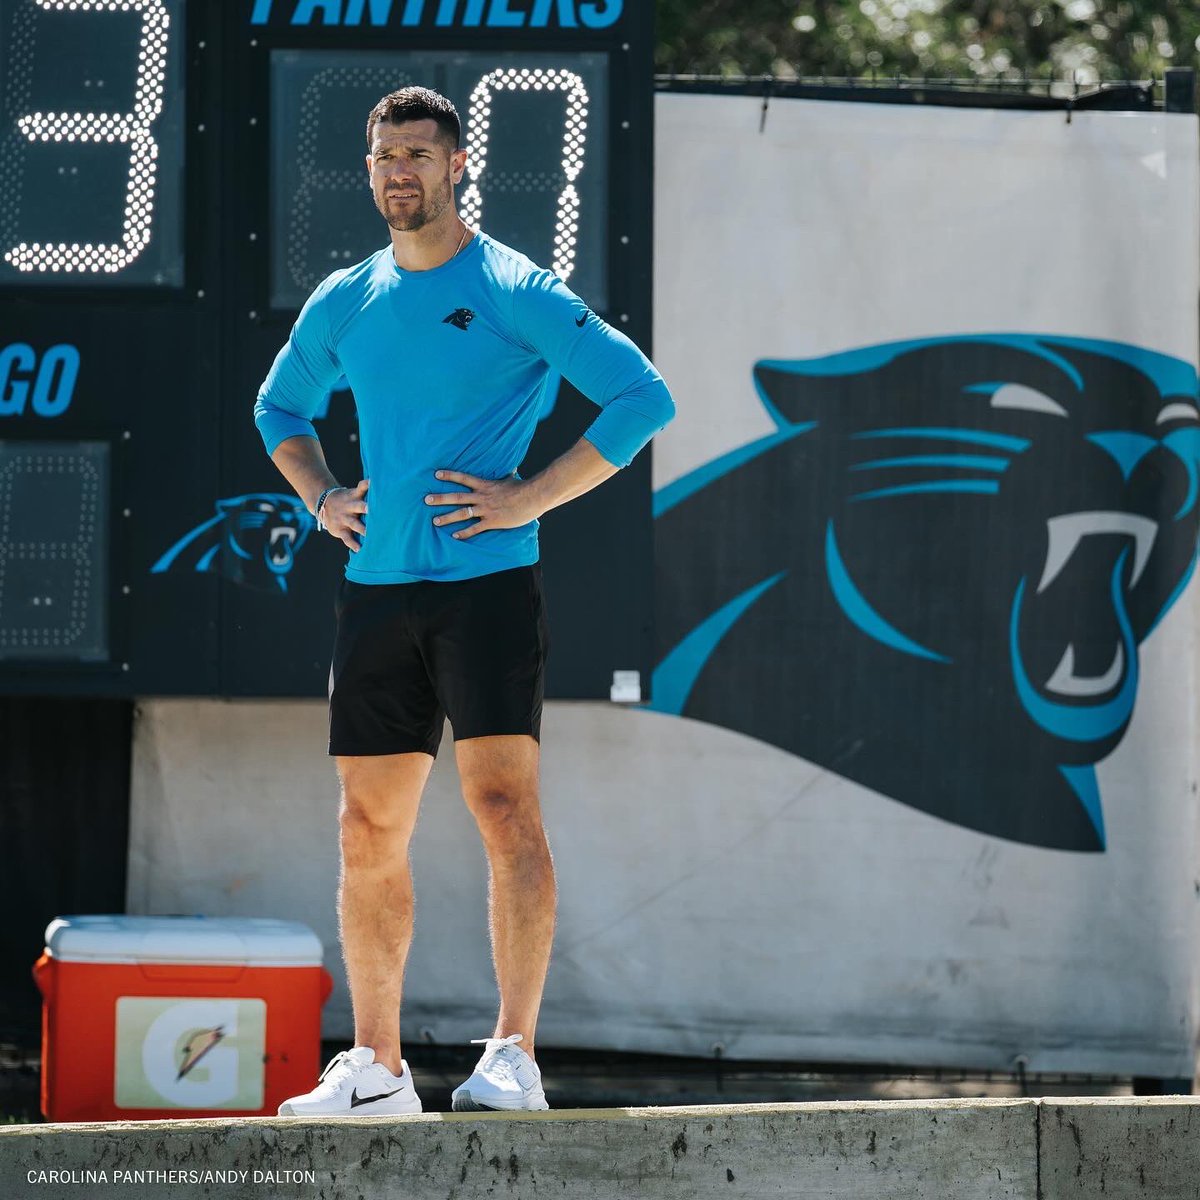 Watch him become the greatest head coach in franchise history #KeepPounding